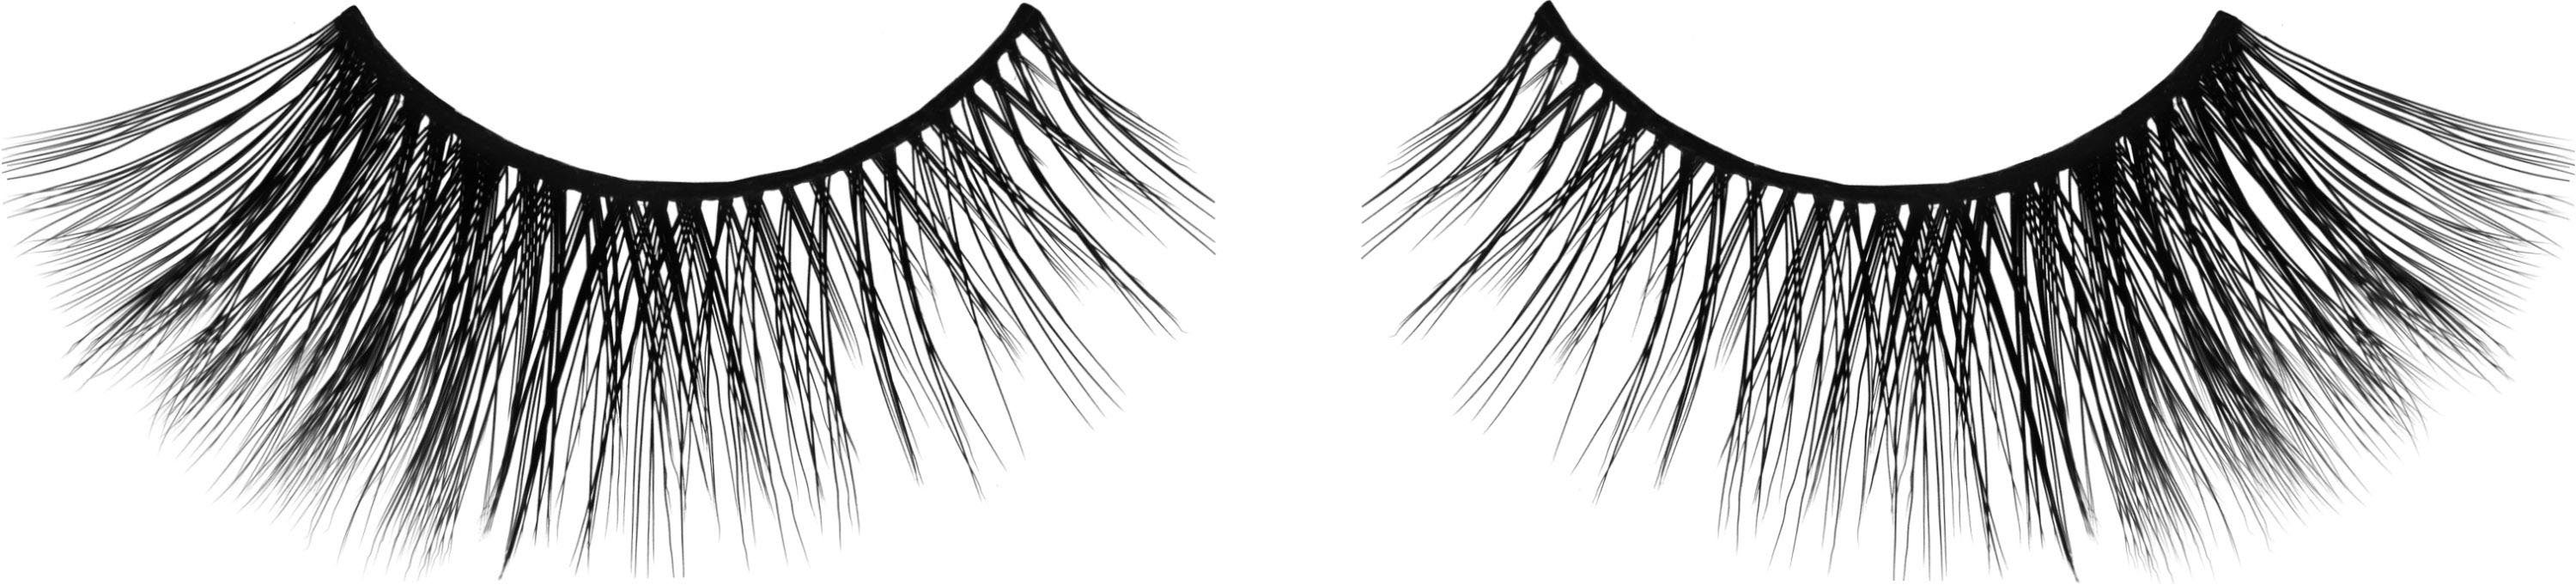 Catrice Bandwimpern Faked 3D 3 Lift High Set, Lashes